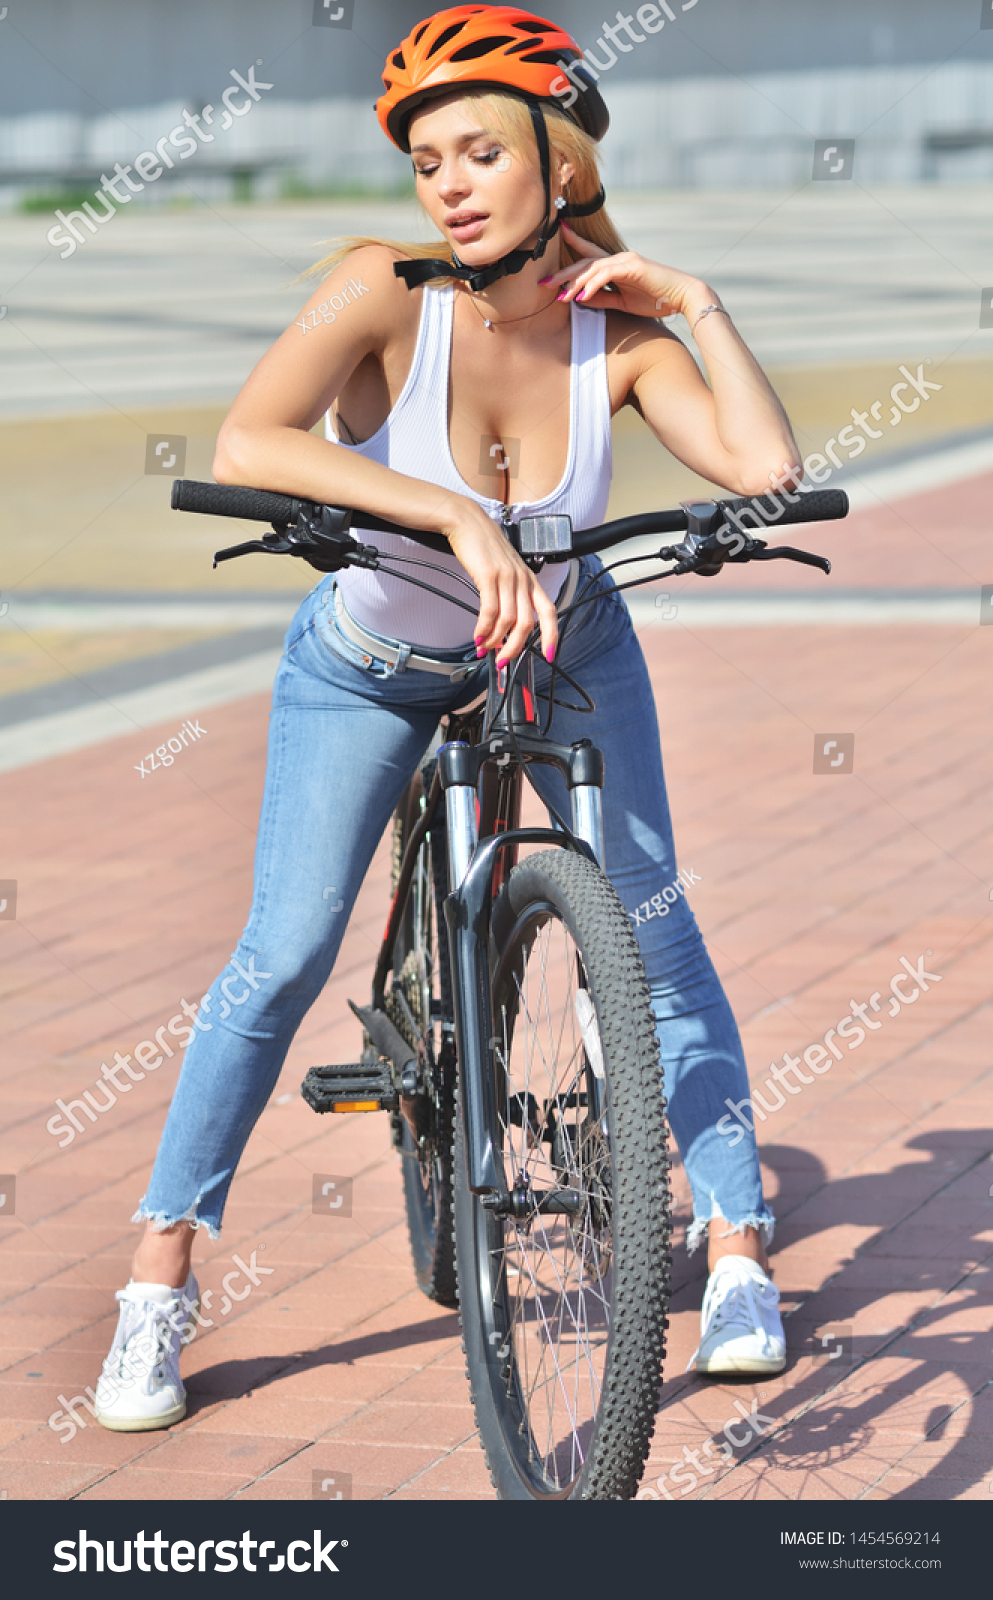 Best of Big tits and bikes